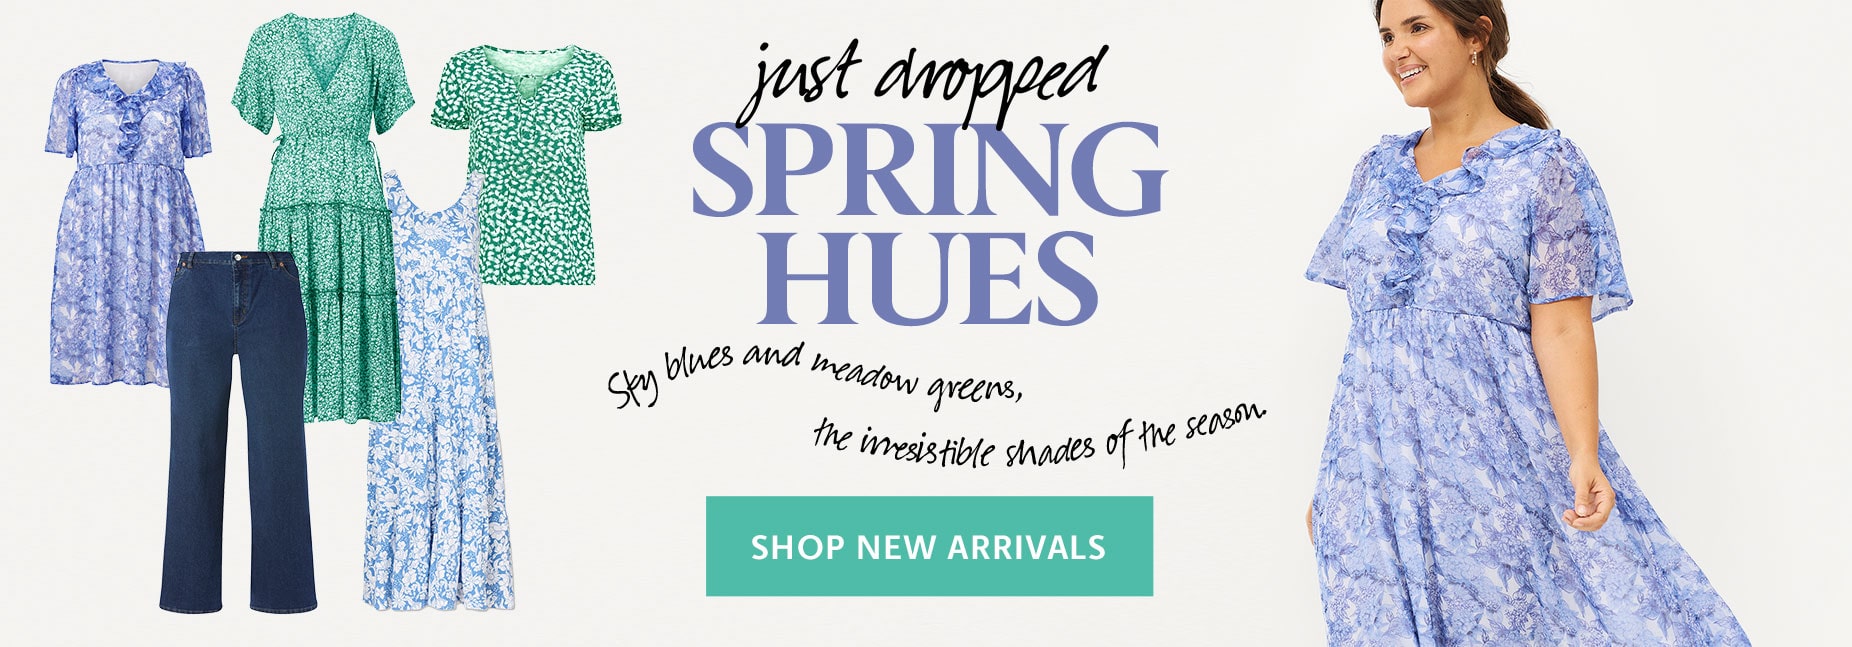 New Arrivals - Just Dropped Spring Hues